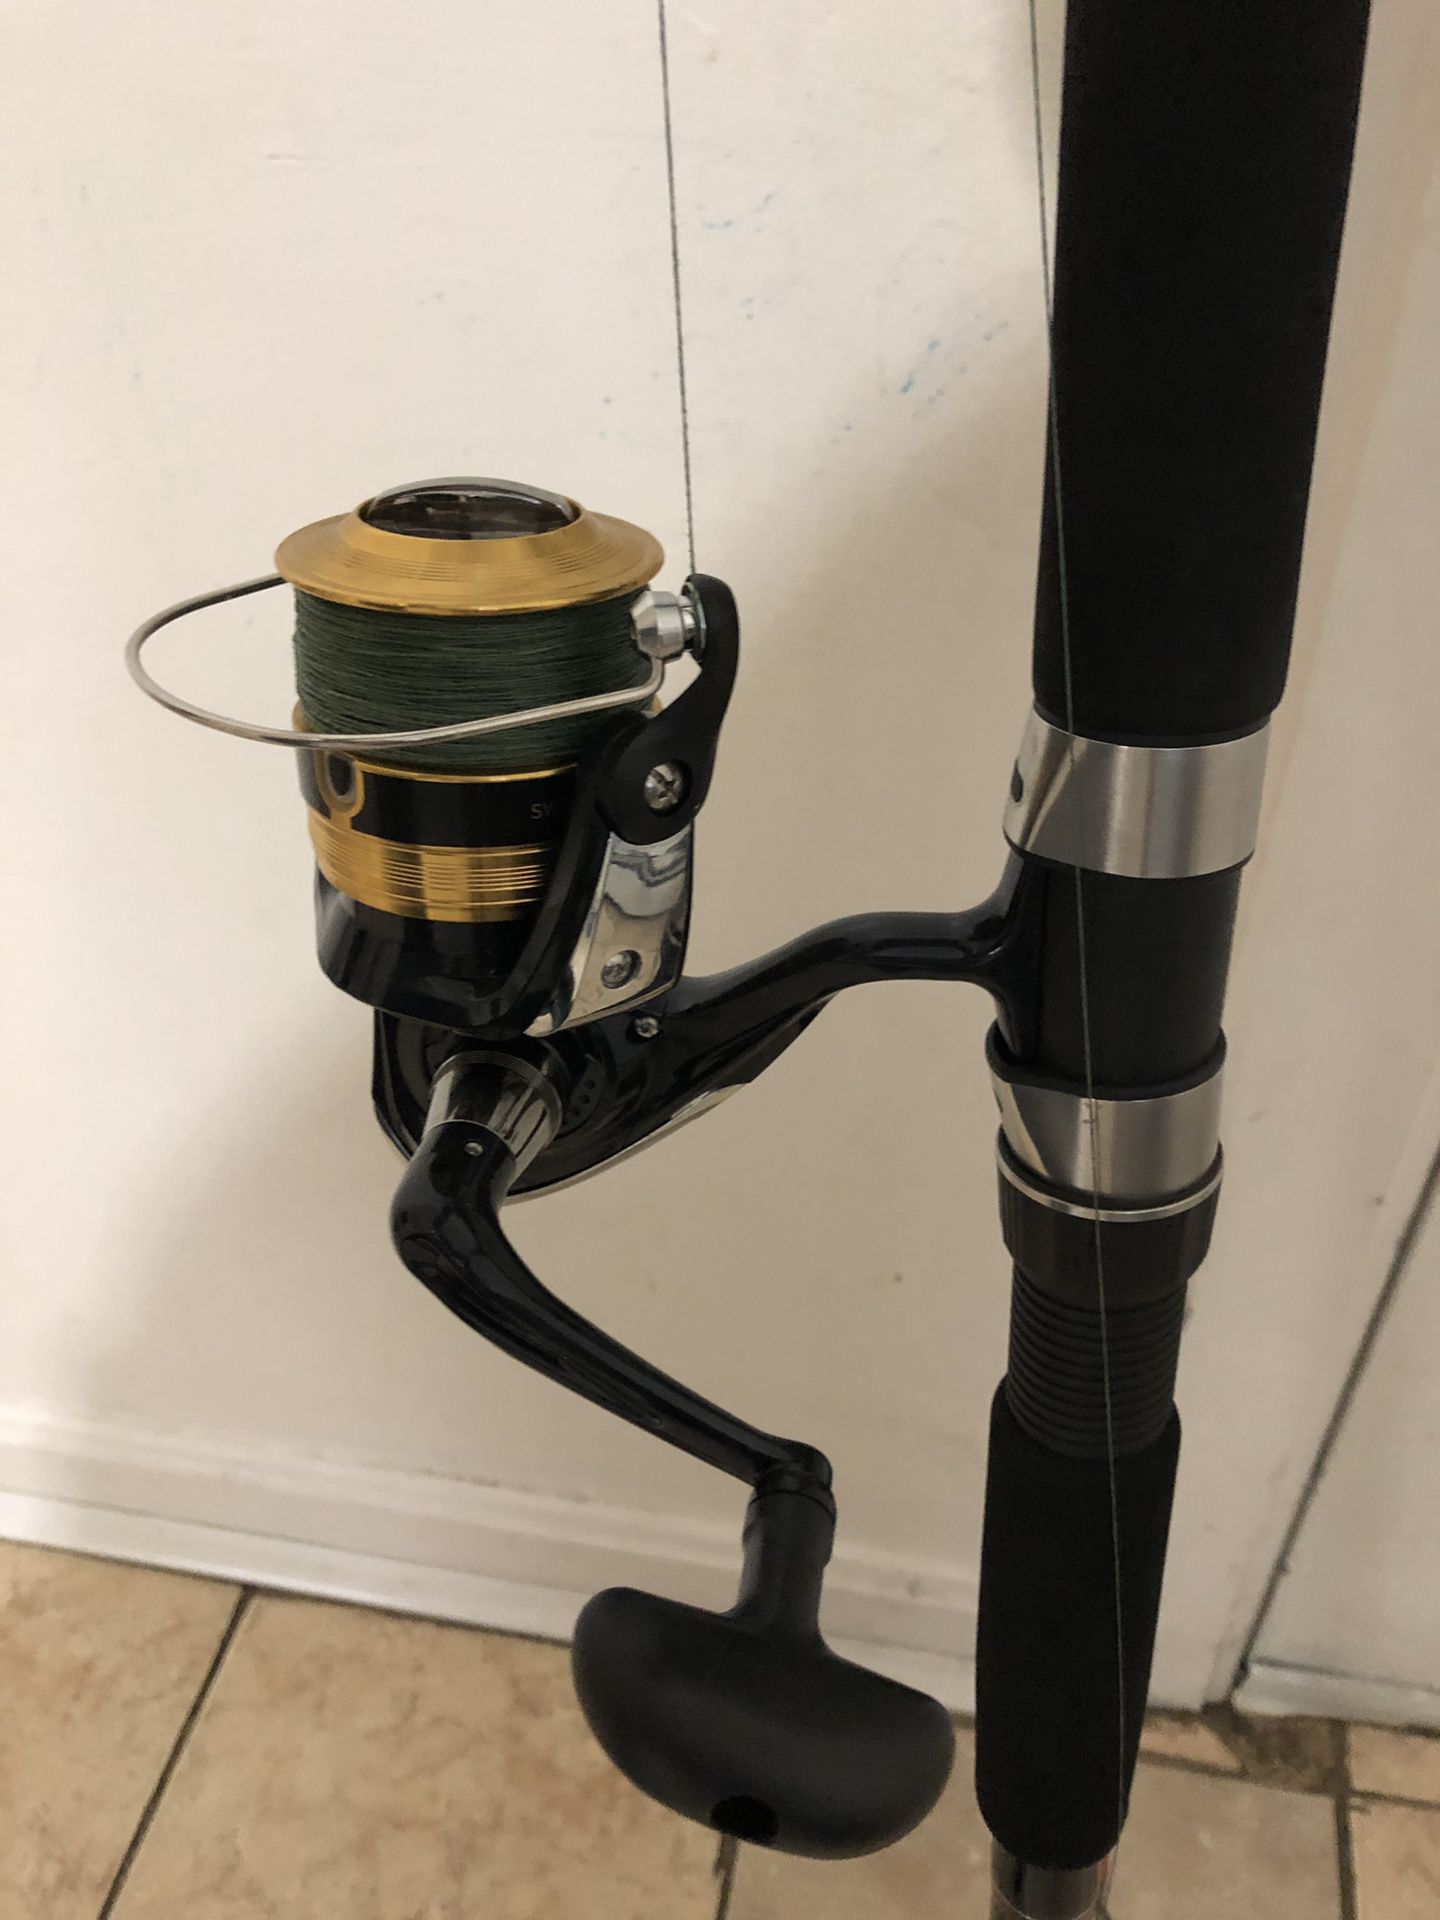 Caña Ugly Stik 13 feet, Reel 4000, with line 40 pounds